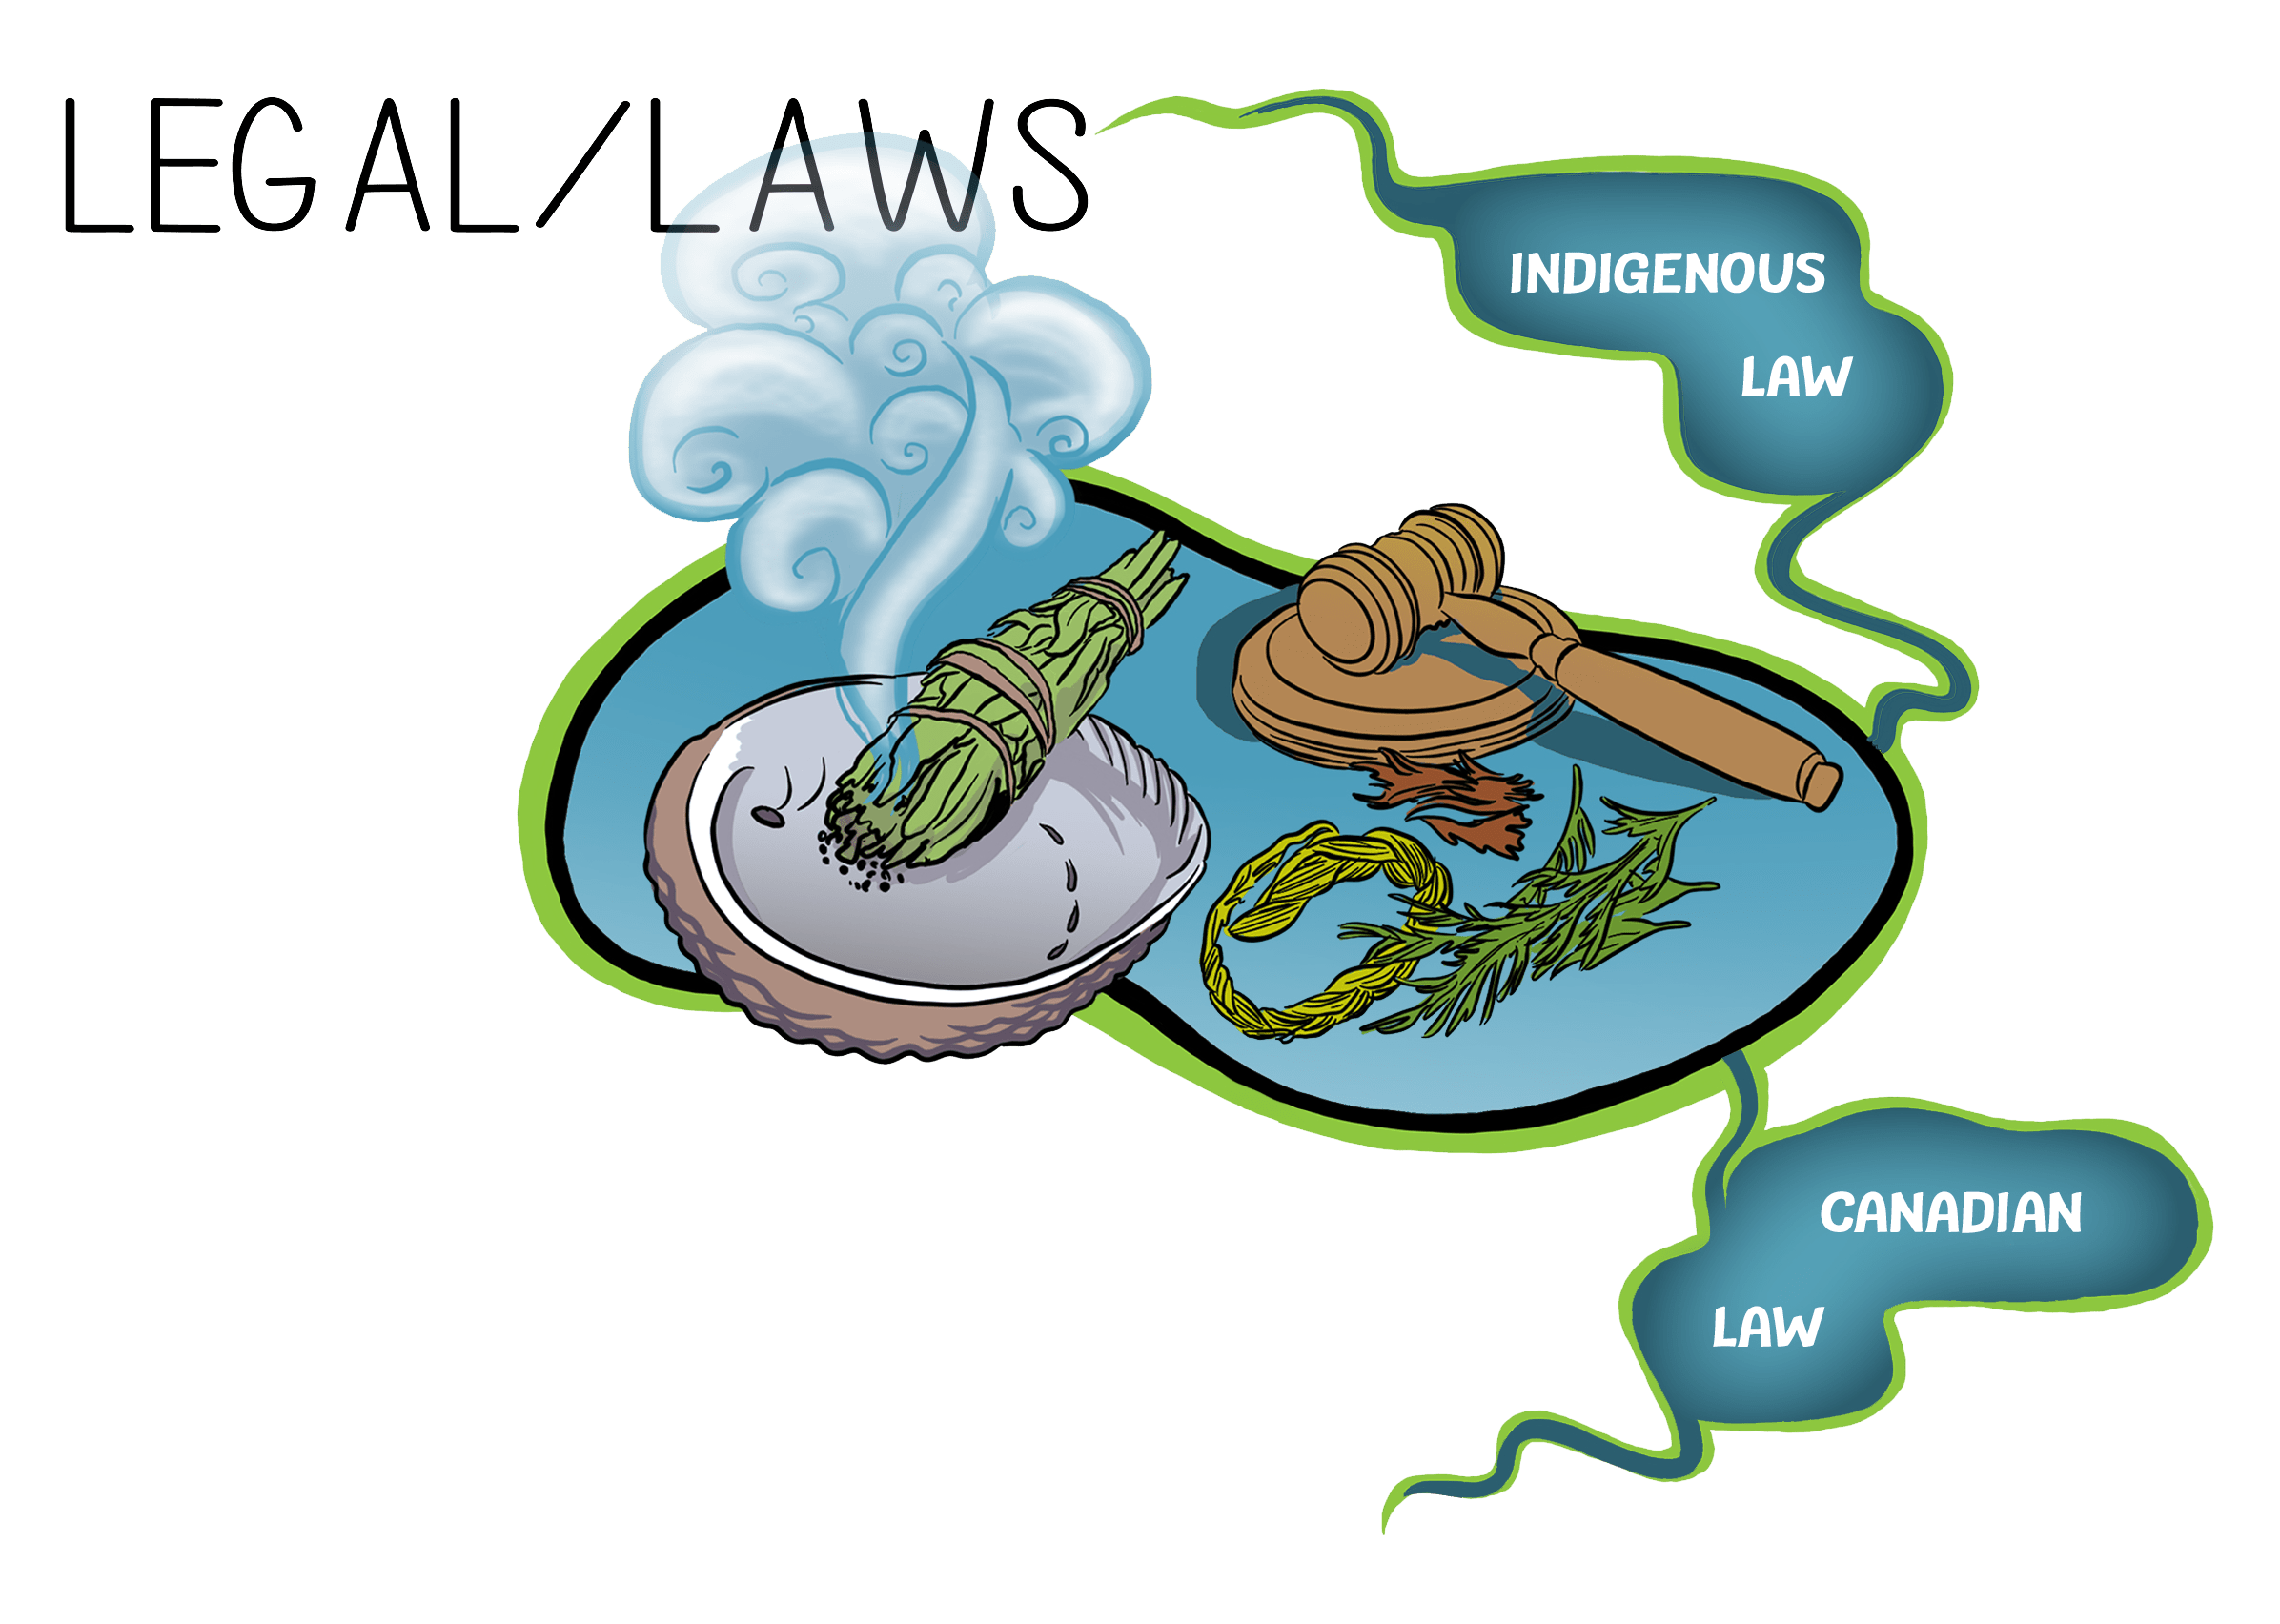 Legal/Laws infographic